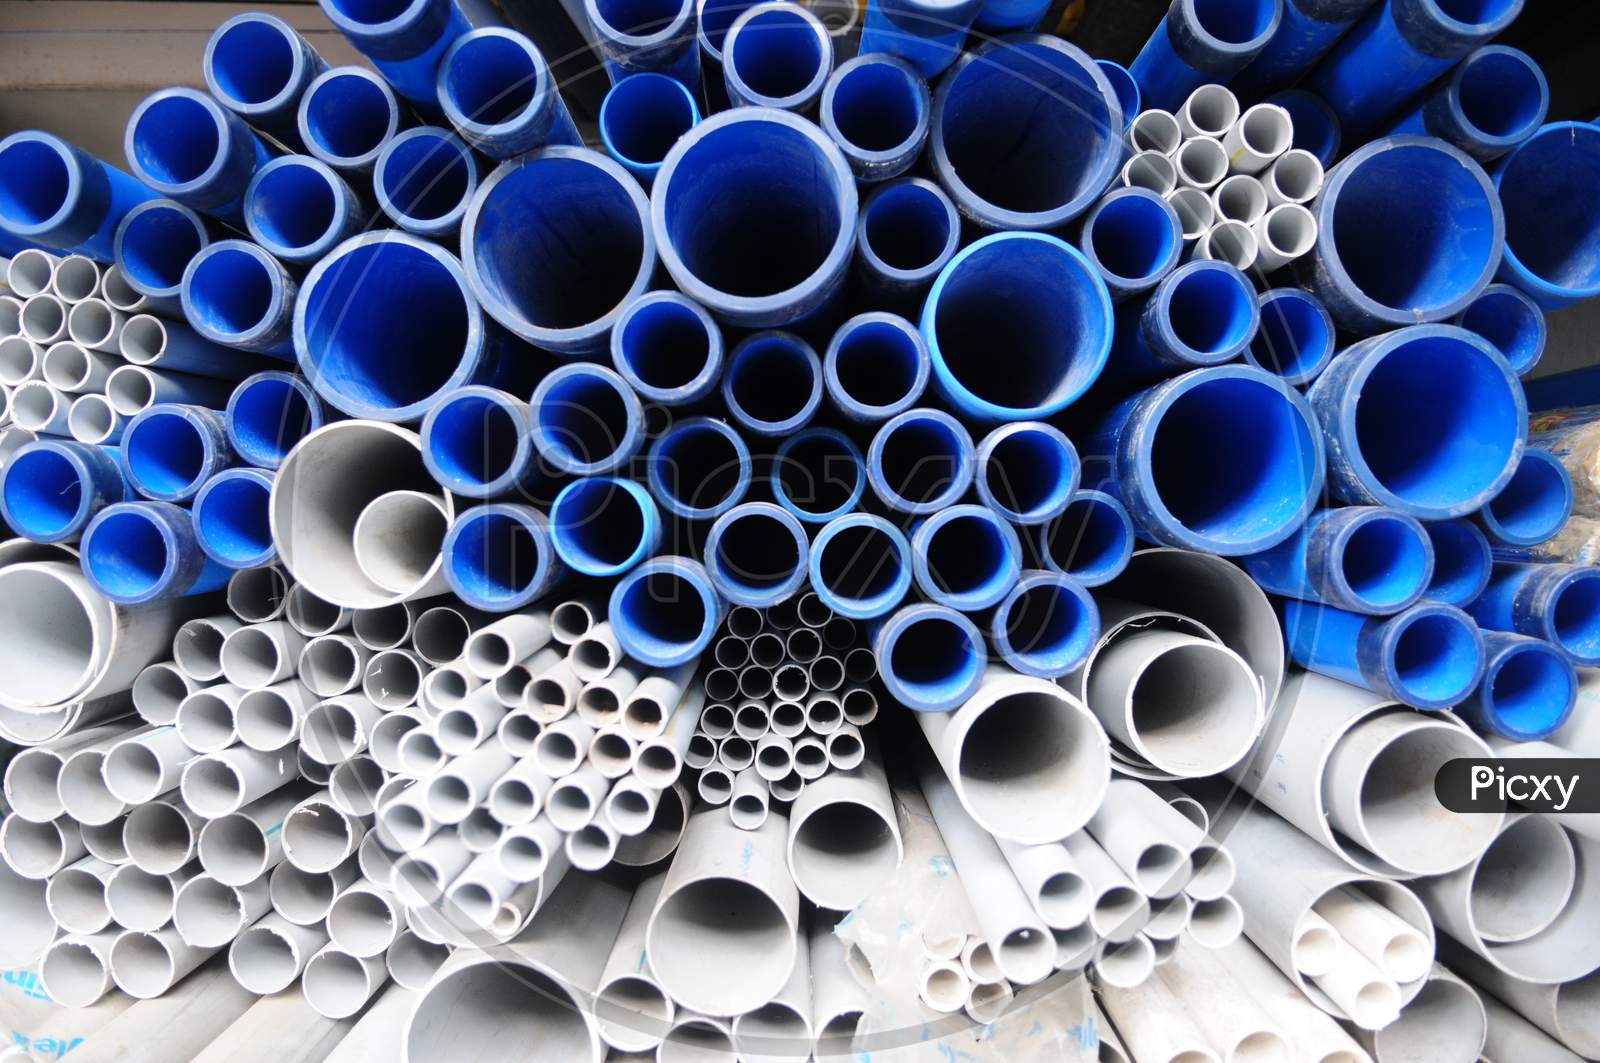 Patterns of Plastic Pipes